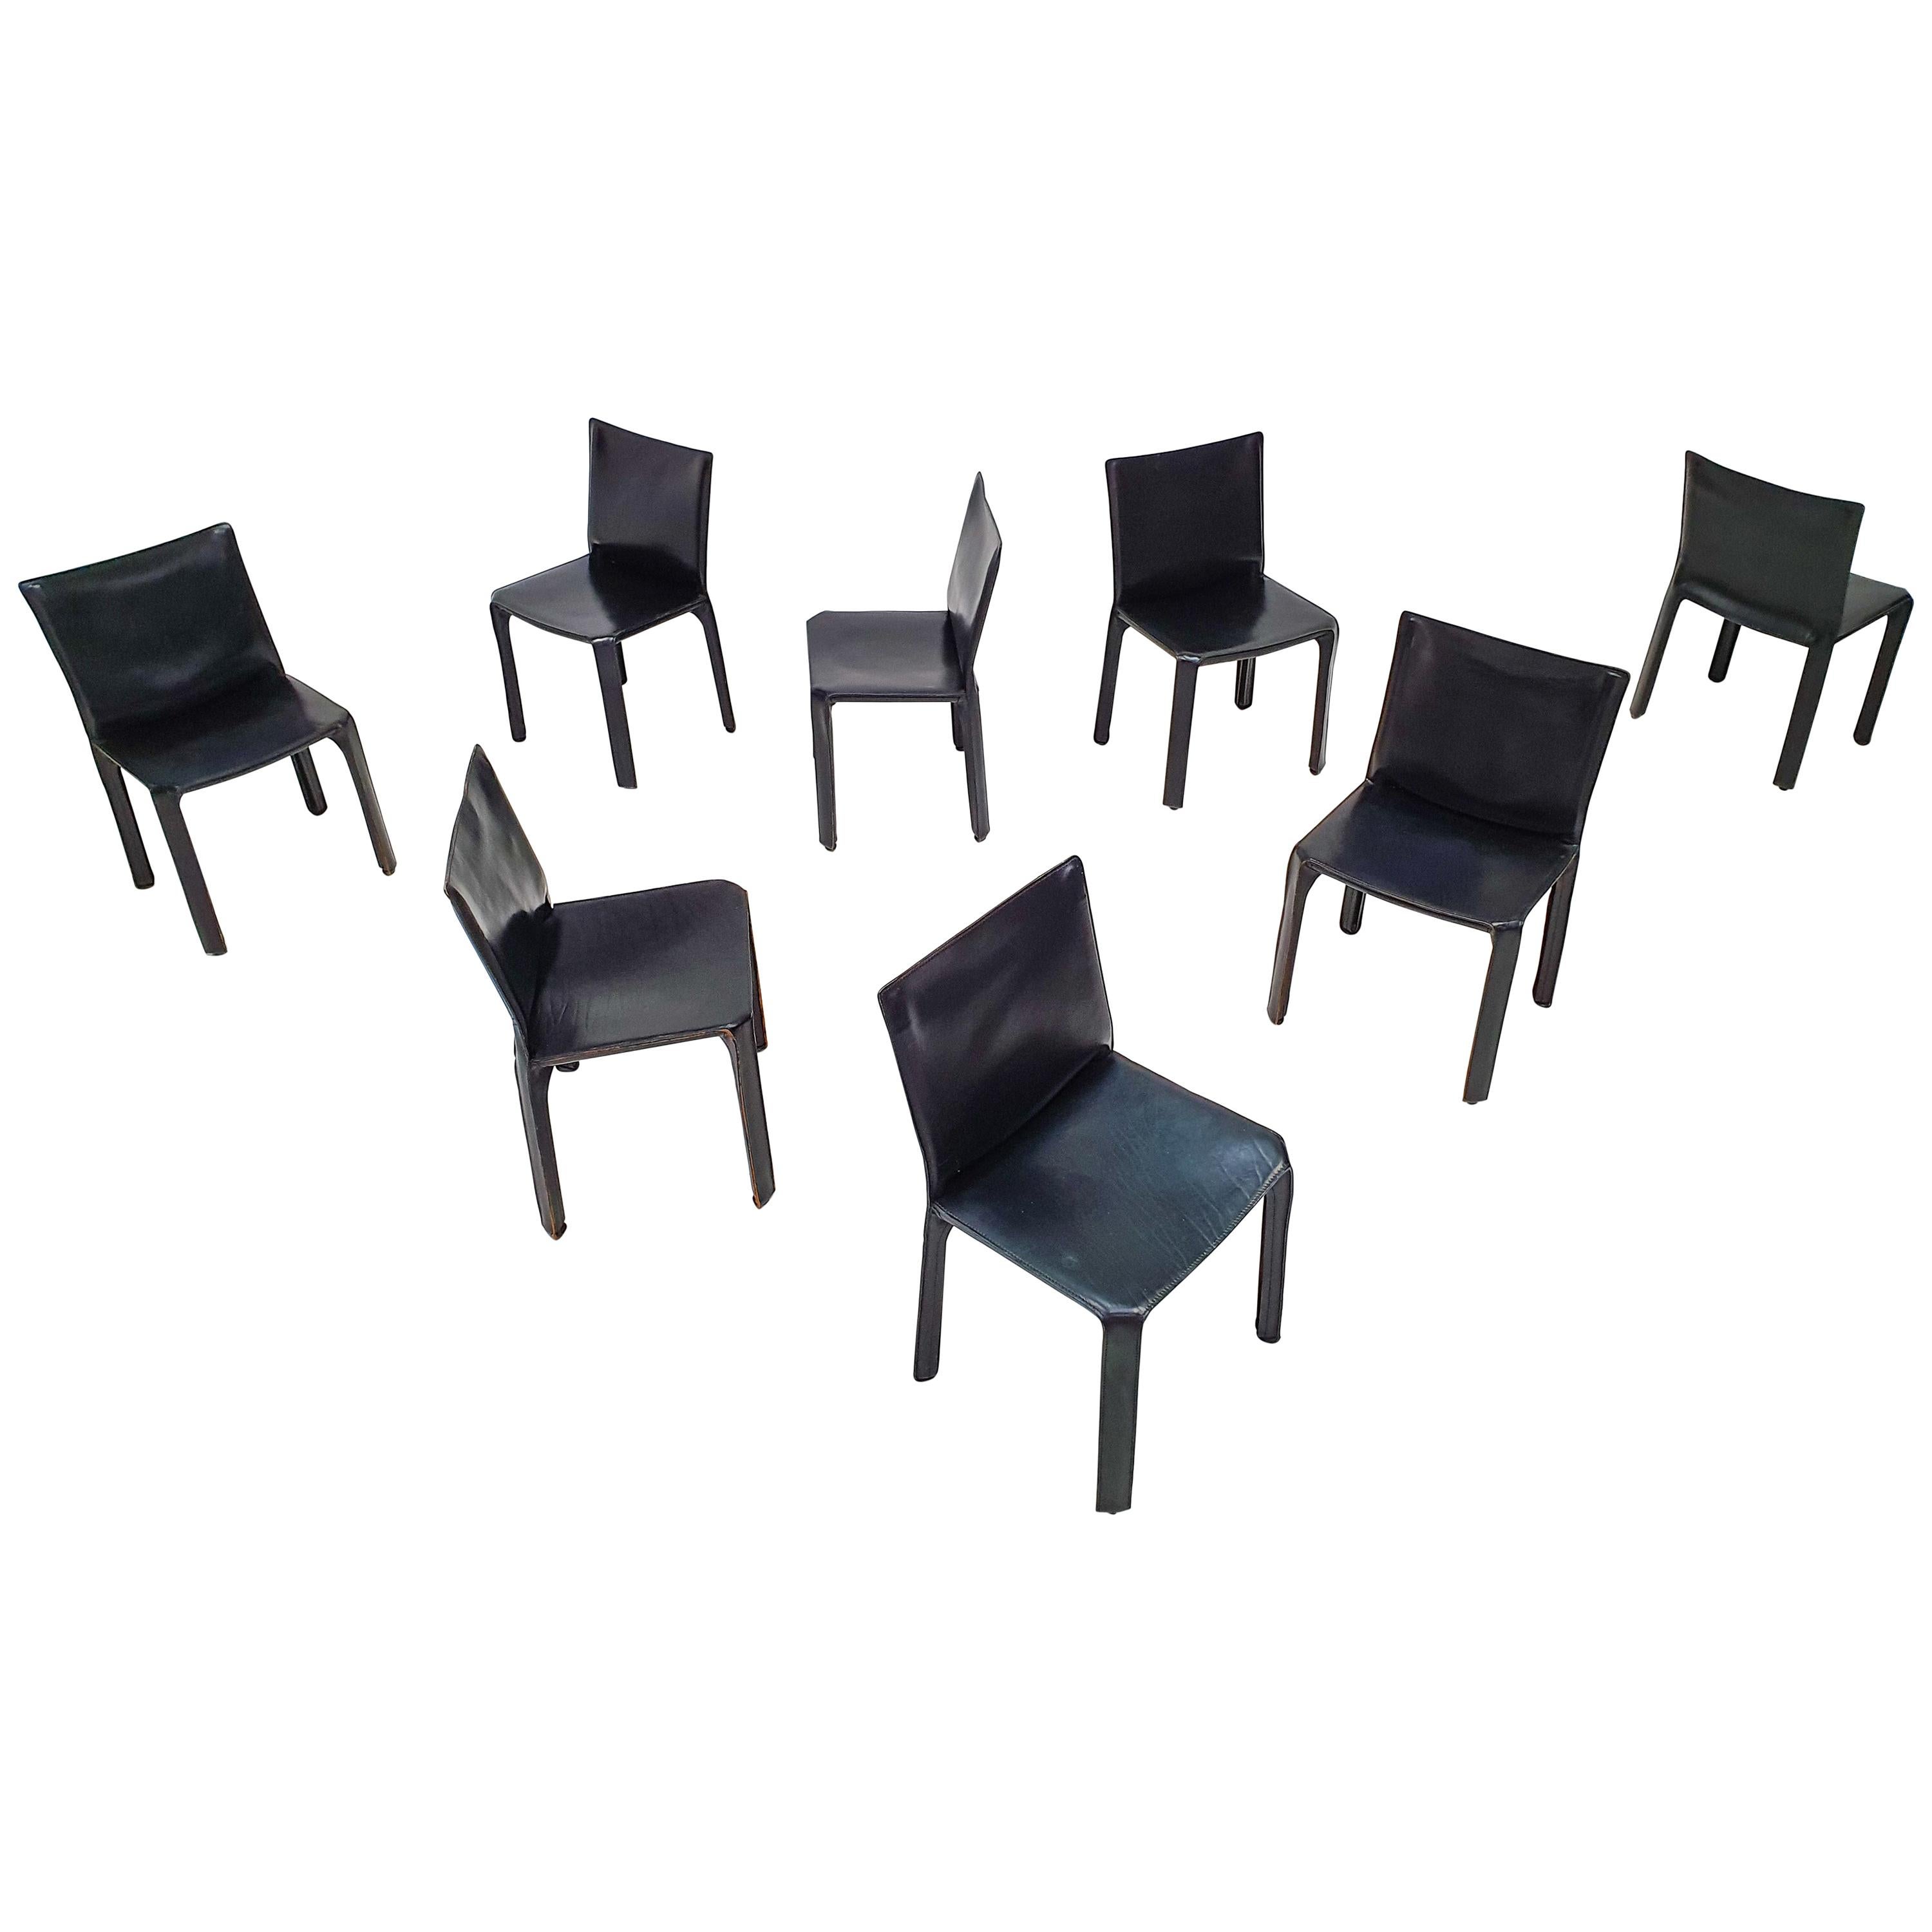 Set of 8 Mario Bellini Leather CAB Chairs in Black for Cassina, 1977, Italy